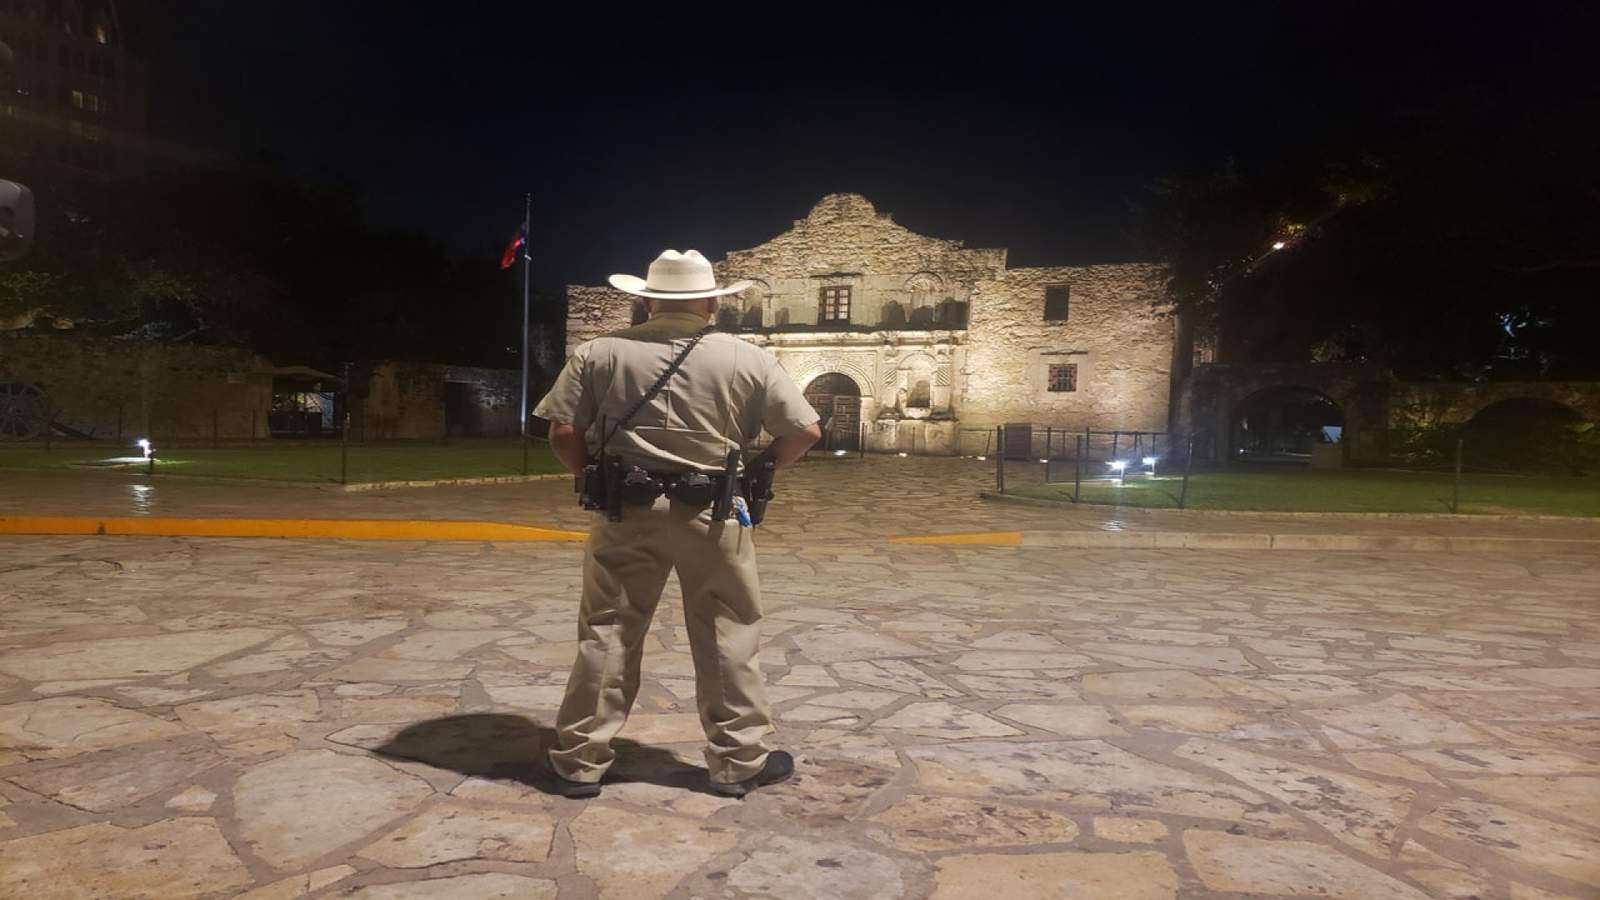 Alamo Rangers protect history, answer questions in middle of night